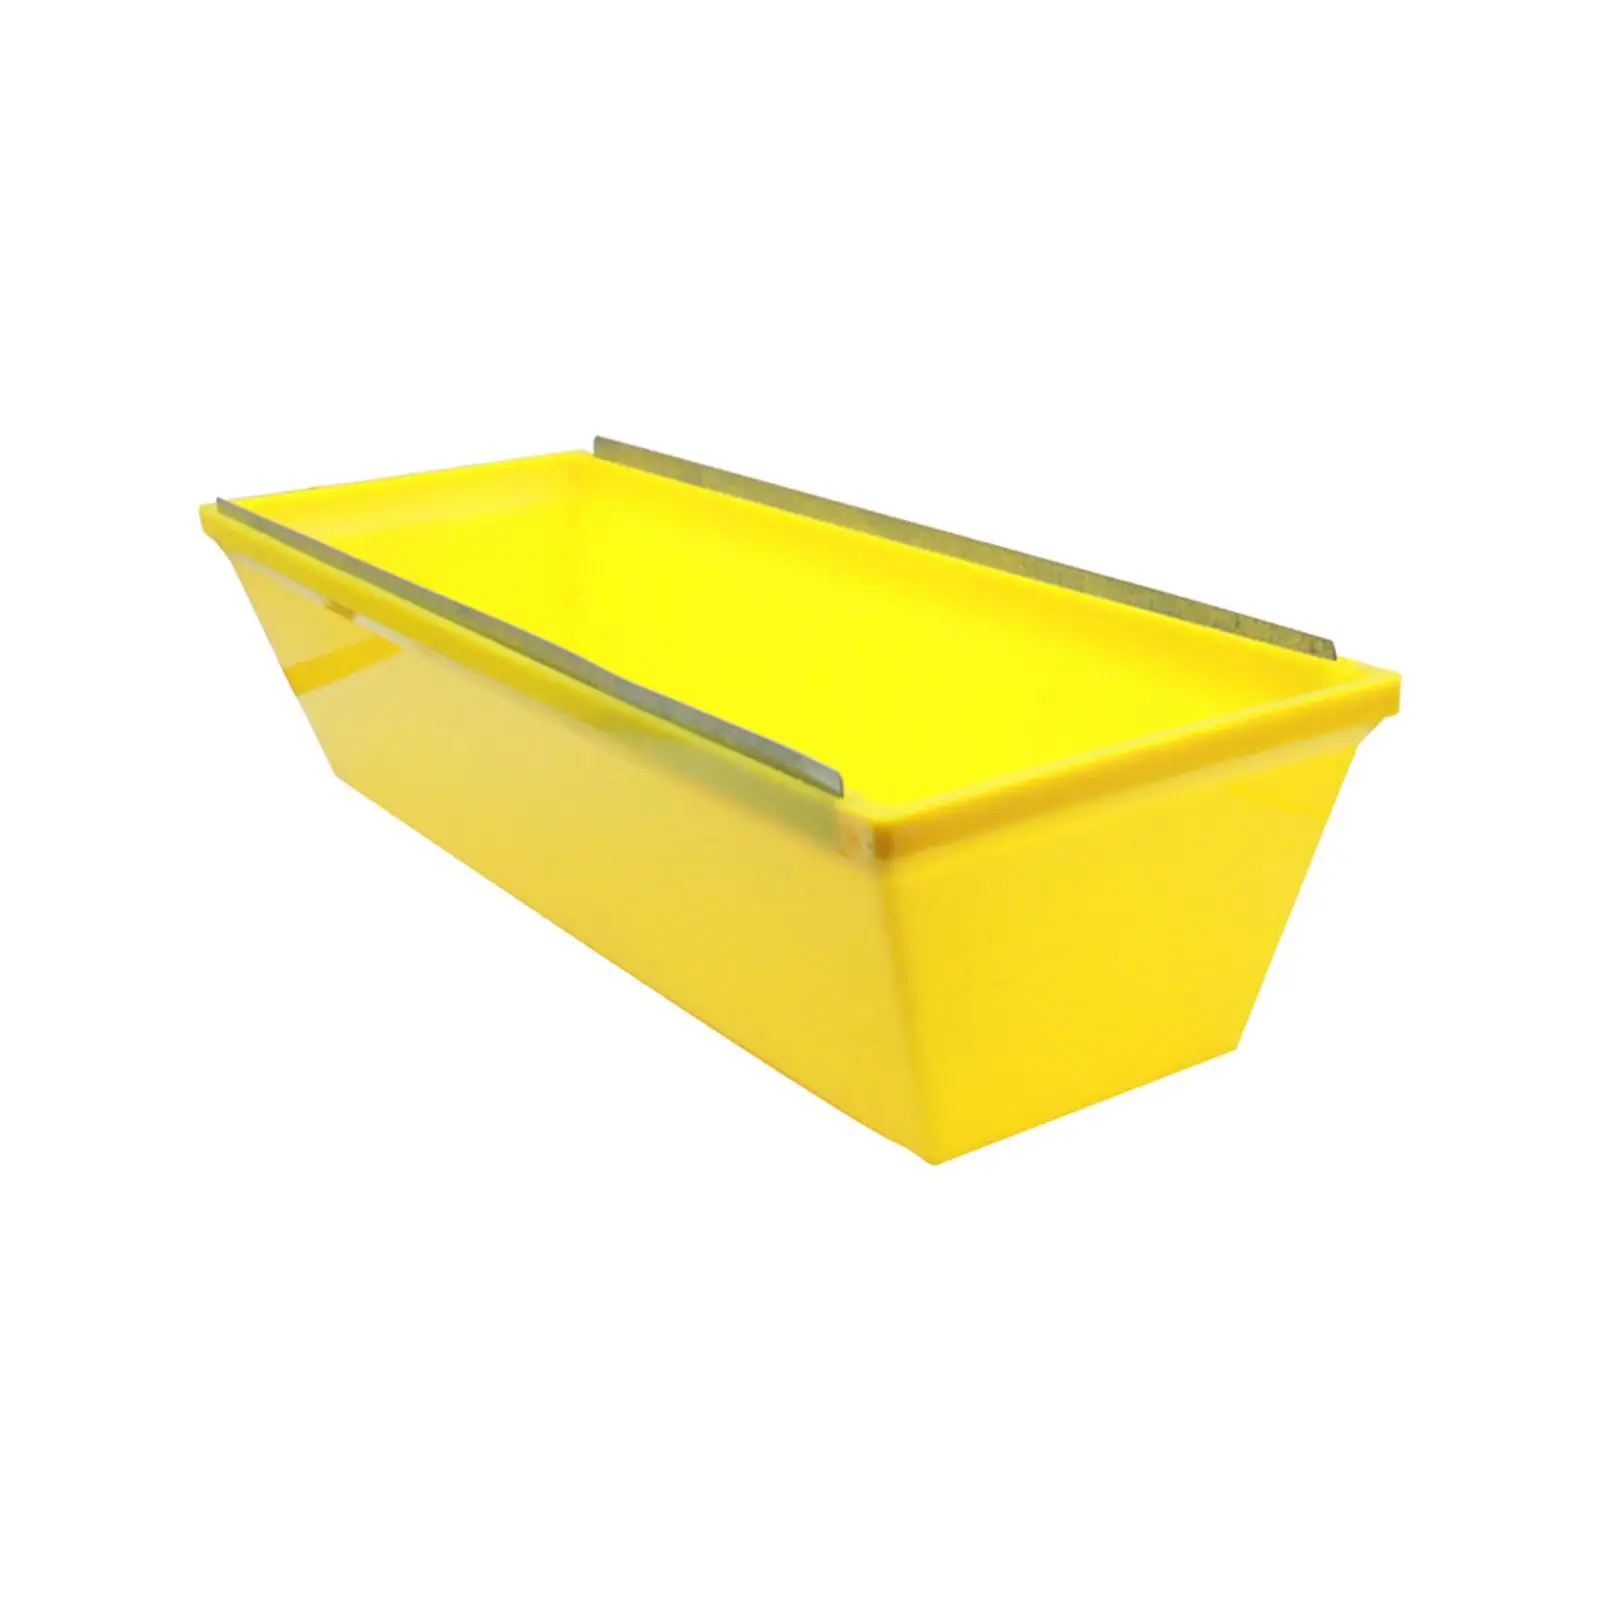 12 Mud Pan Plastering Tapered Sides Professional Easy to Clean Heavy Duty Drywall Masonry Tool Tray Bucket with Scraping Bar